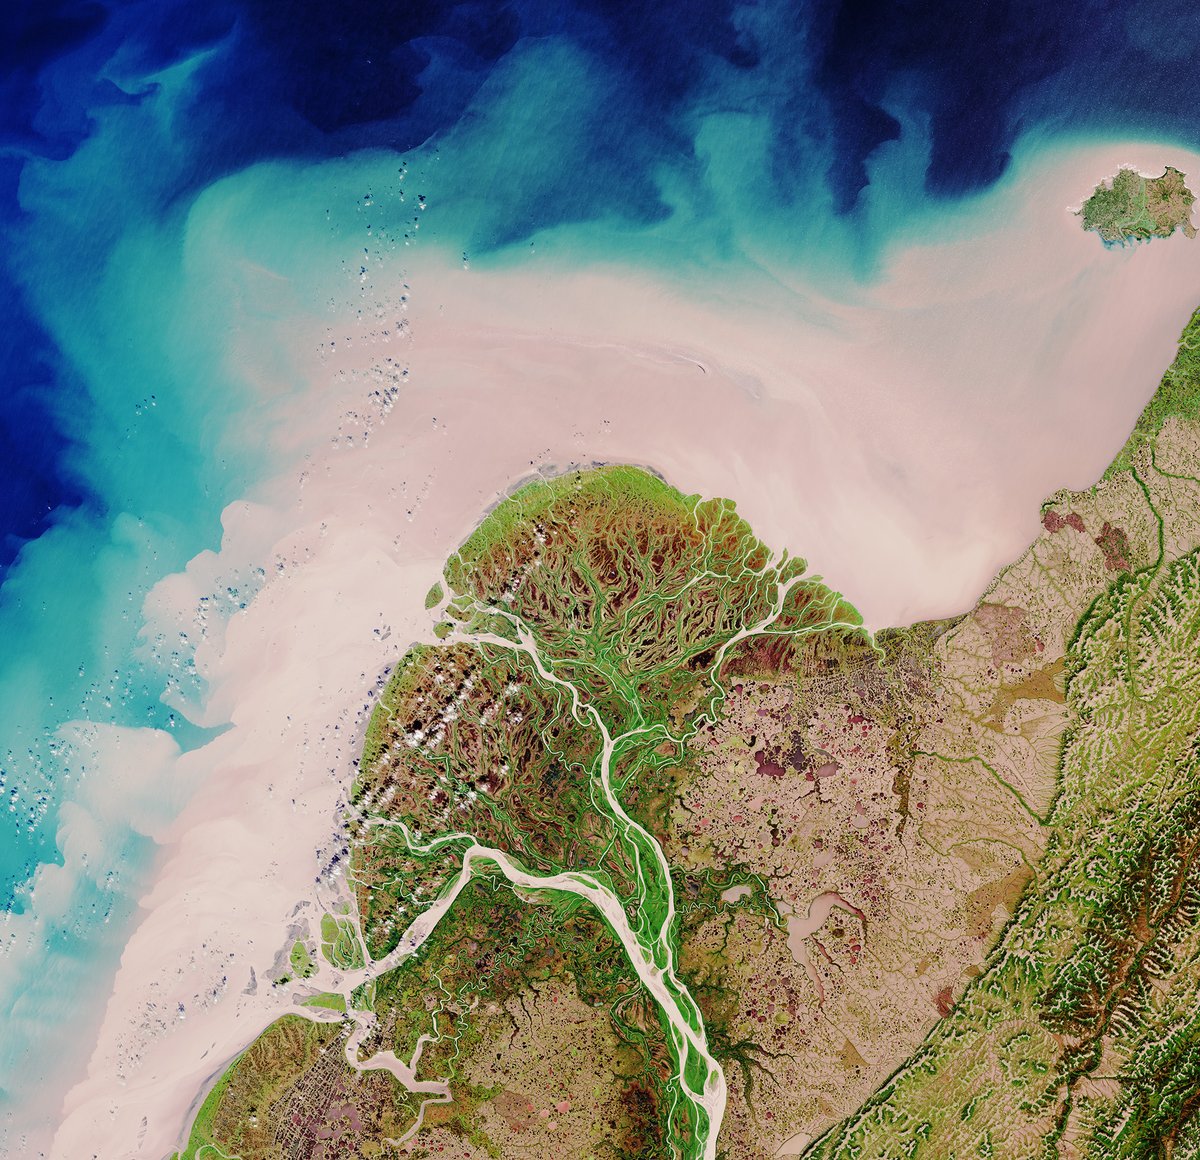 📷 This week's #EarthFromSpace takes us us over part of the Yukon Delta in the US state of Alaska.

The @CopernicusEU #Sentinel2 image shows how the river branches off into numerous channels that meander through the low-lying terrain on their way to the sea and how much sediment